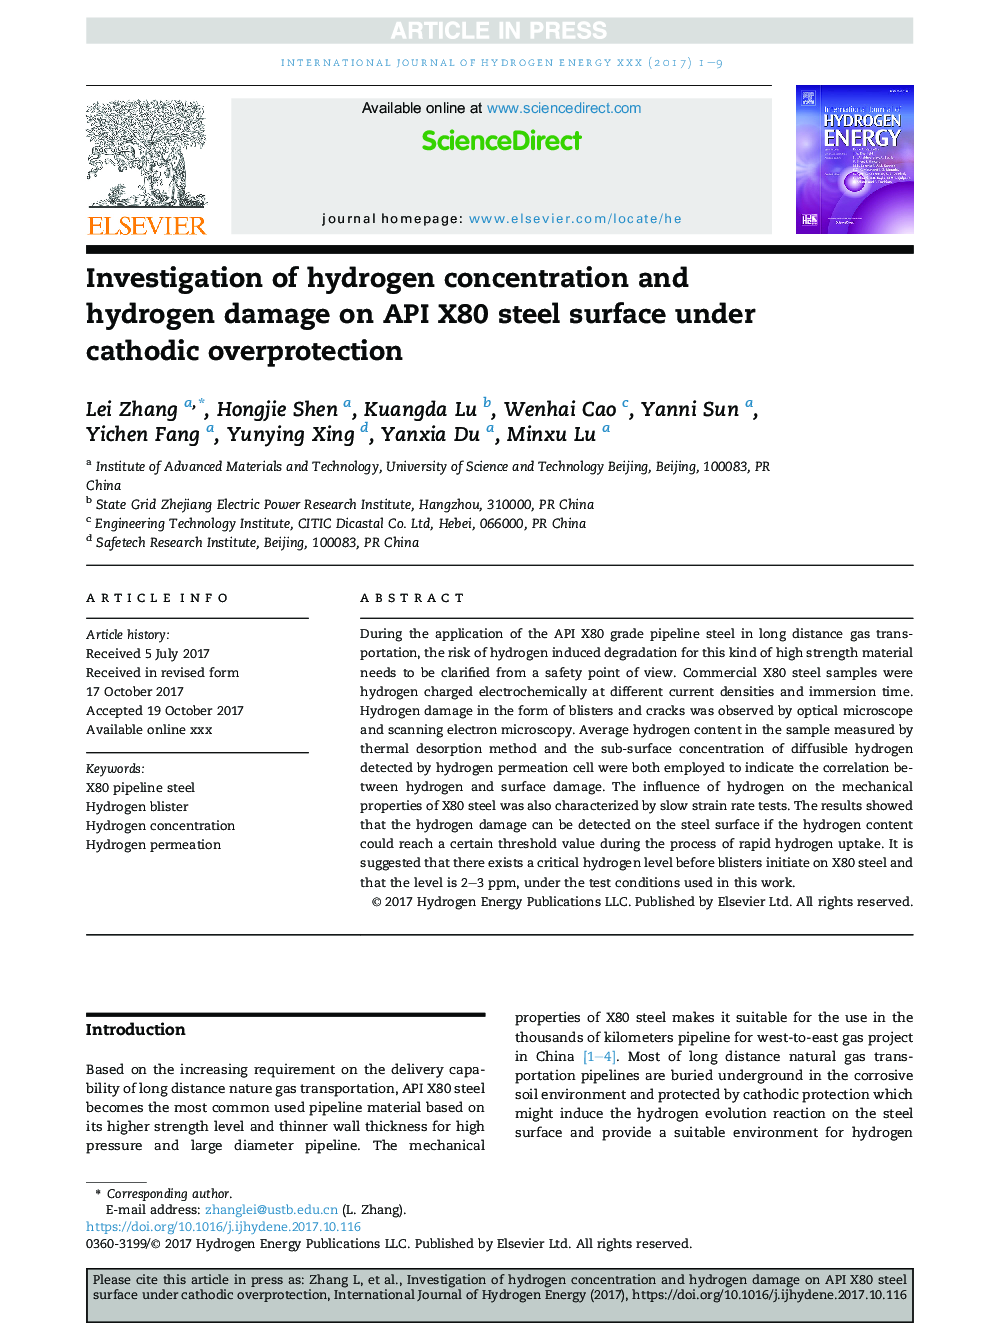 Investigation of hydrogen concentration and hydrogen damage on API X80 steel surface under cathodic overprotection